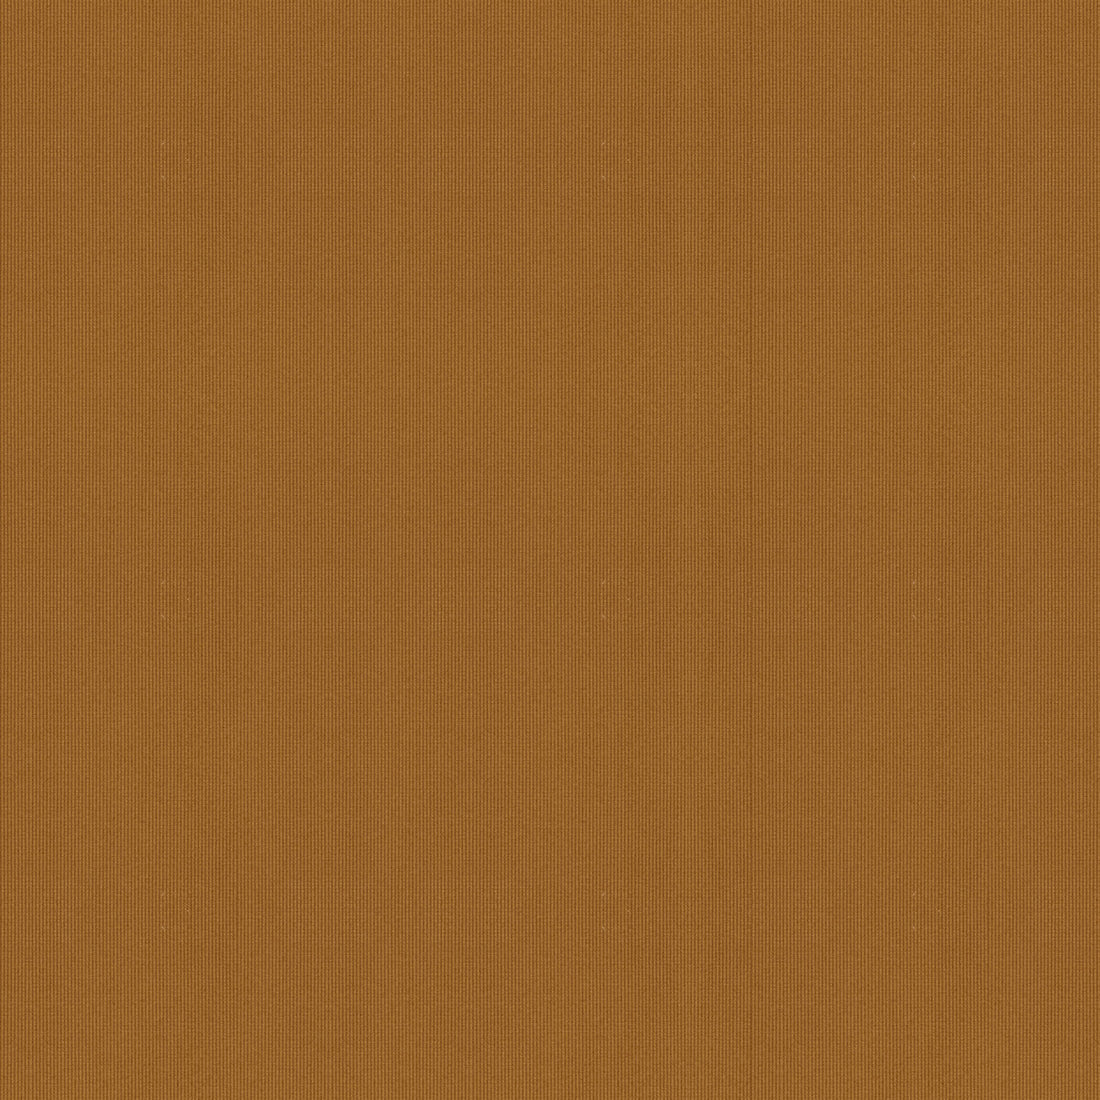 Nimble fabric in caramel color - pattern NIMBLE.1616.0 - by Kravet Couture